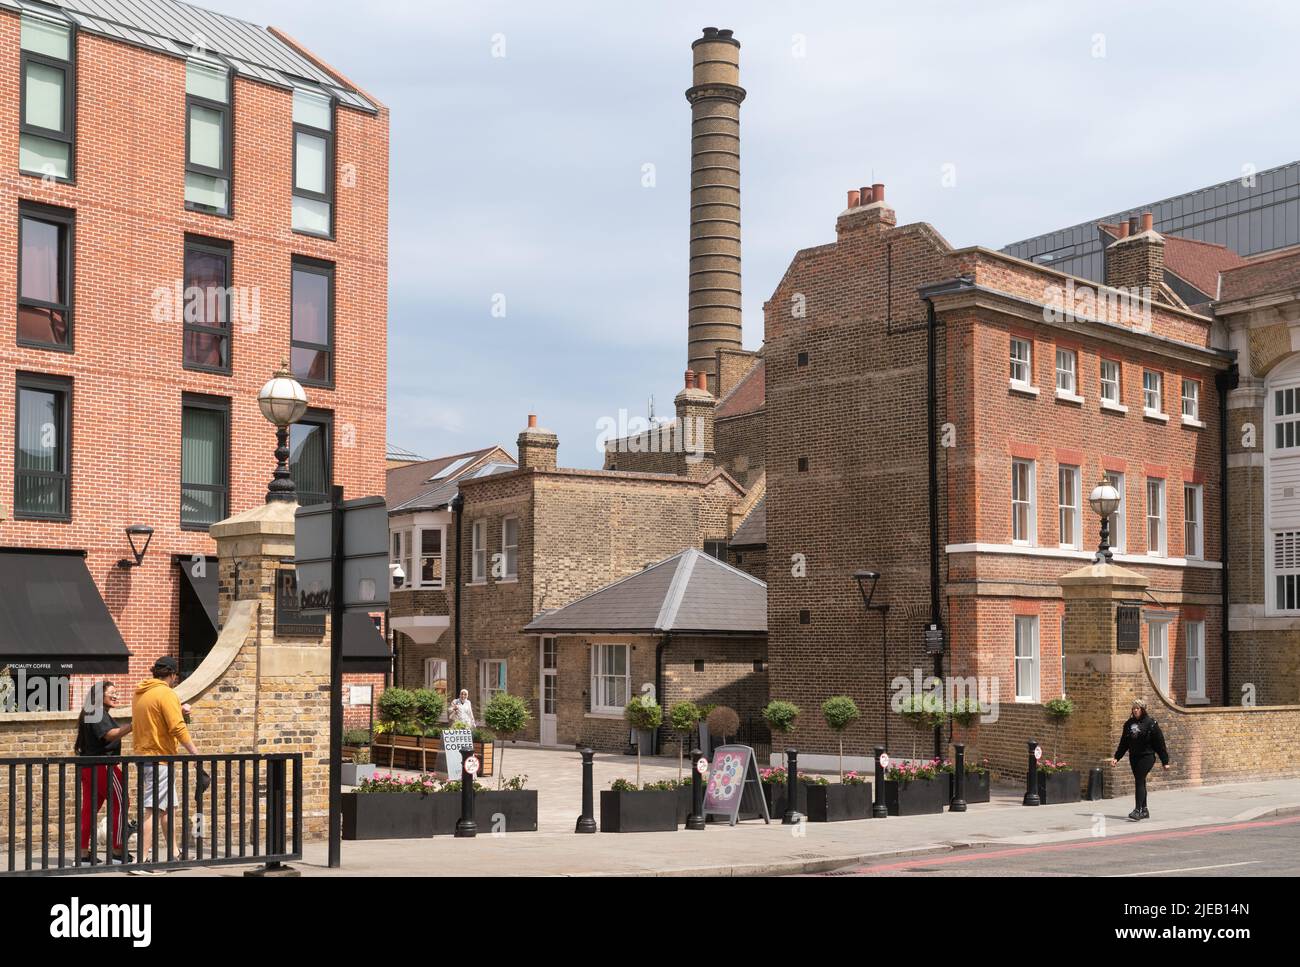 Ram Quarter is set in the grounds of the old Young's Brewery in Wandsworth, London, England Stock Photo